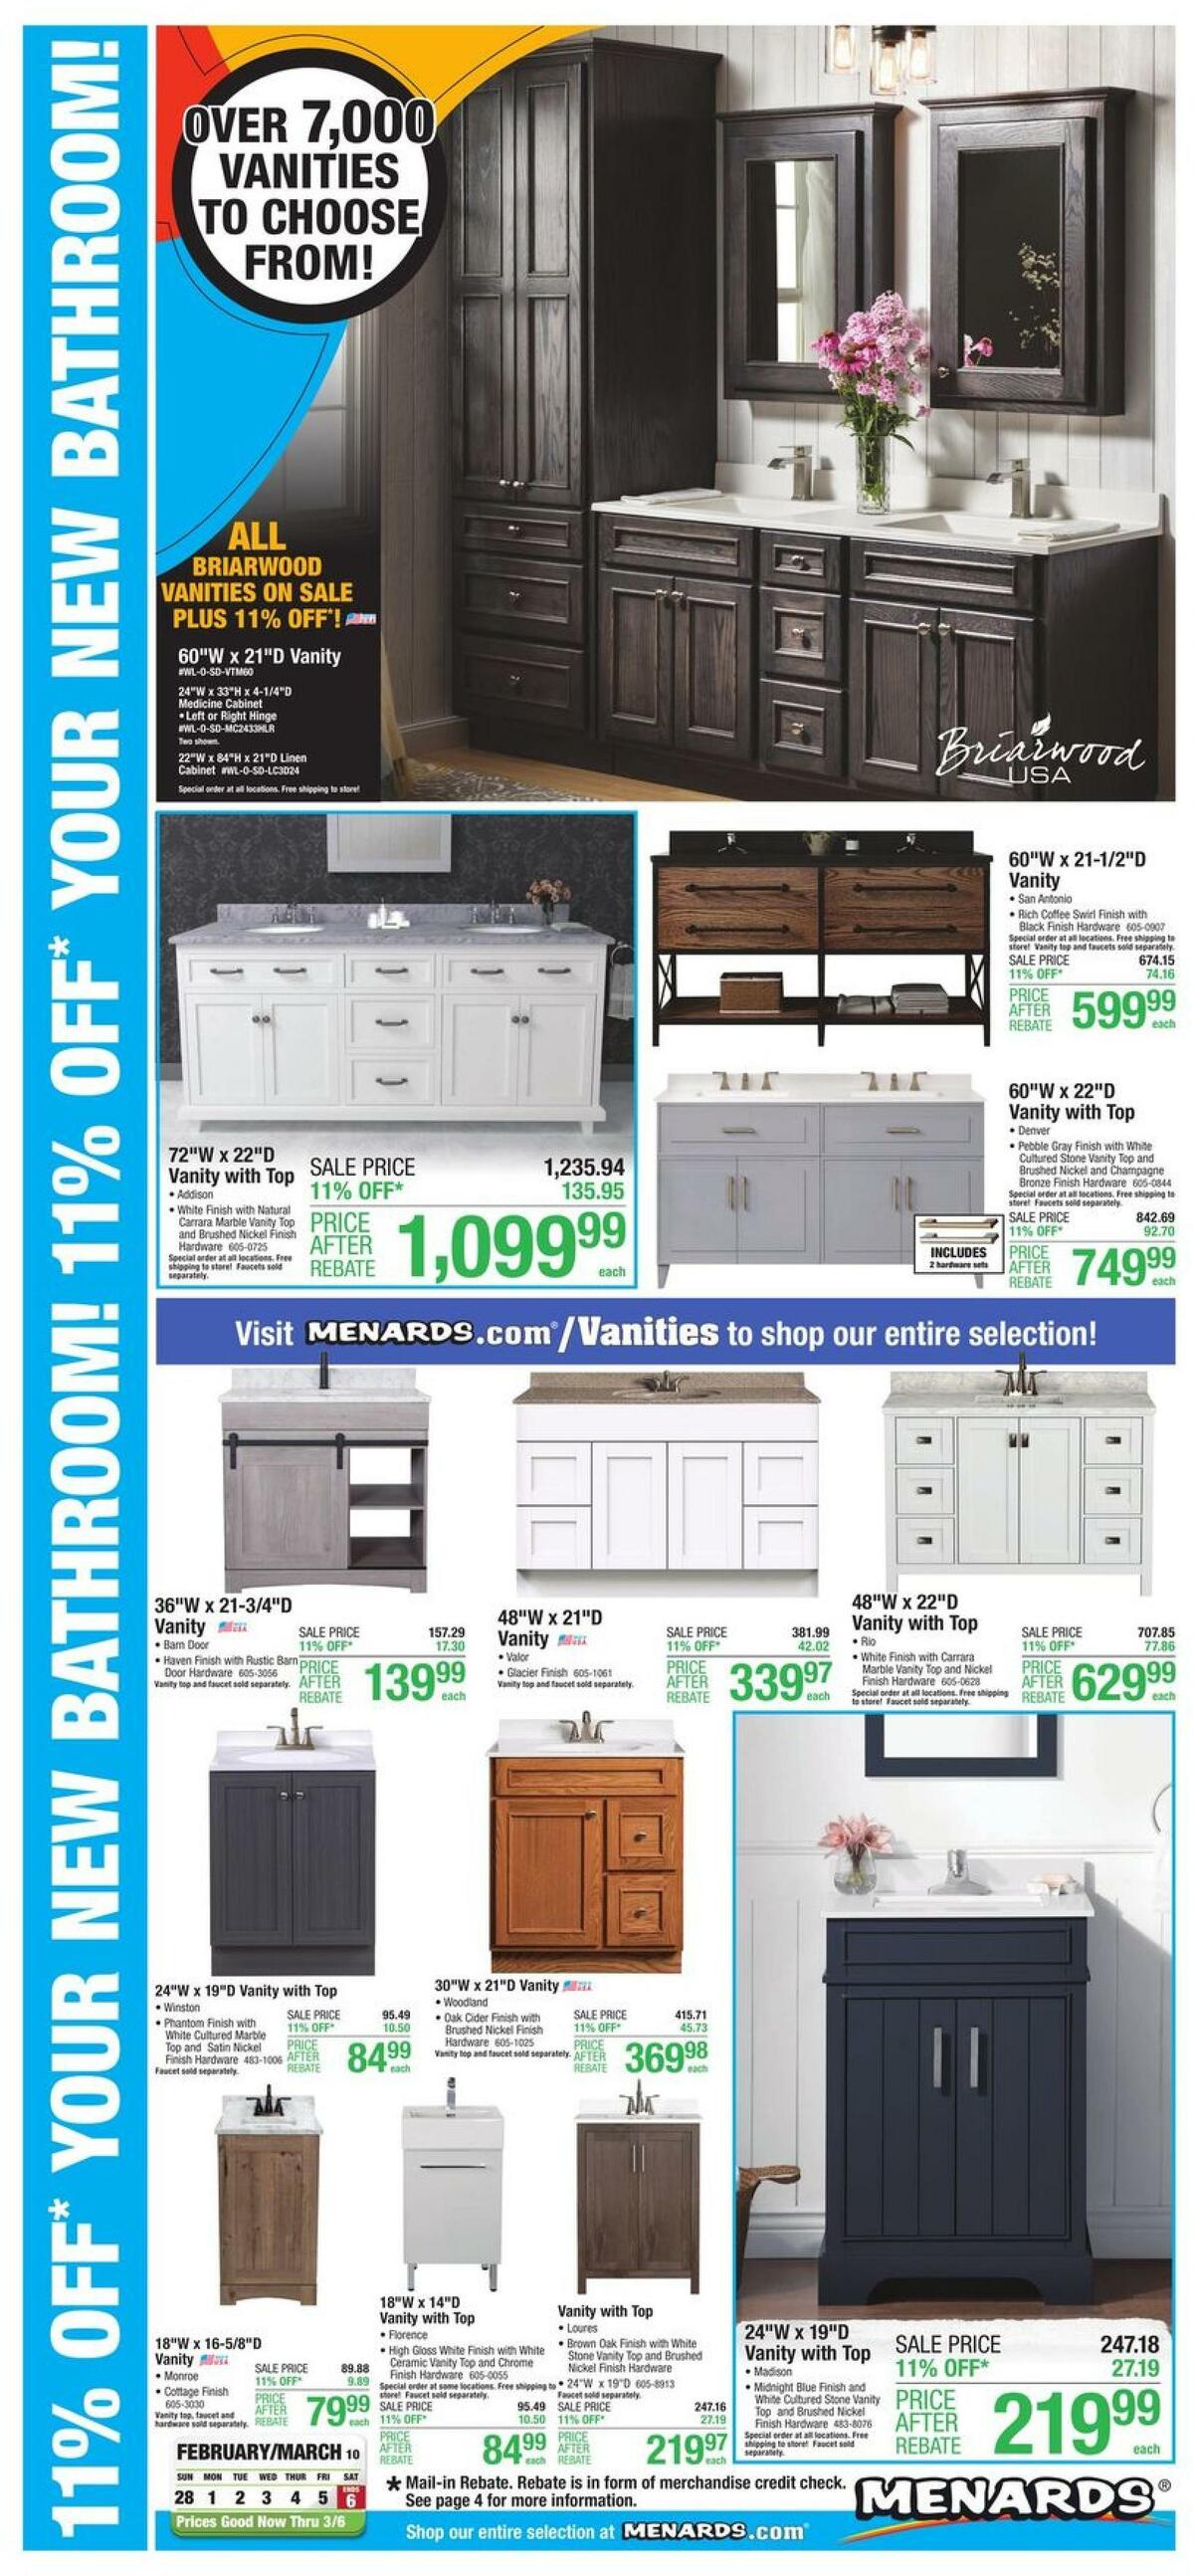 Menards Finished Bath Weekly Ad from February 28